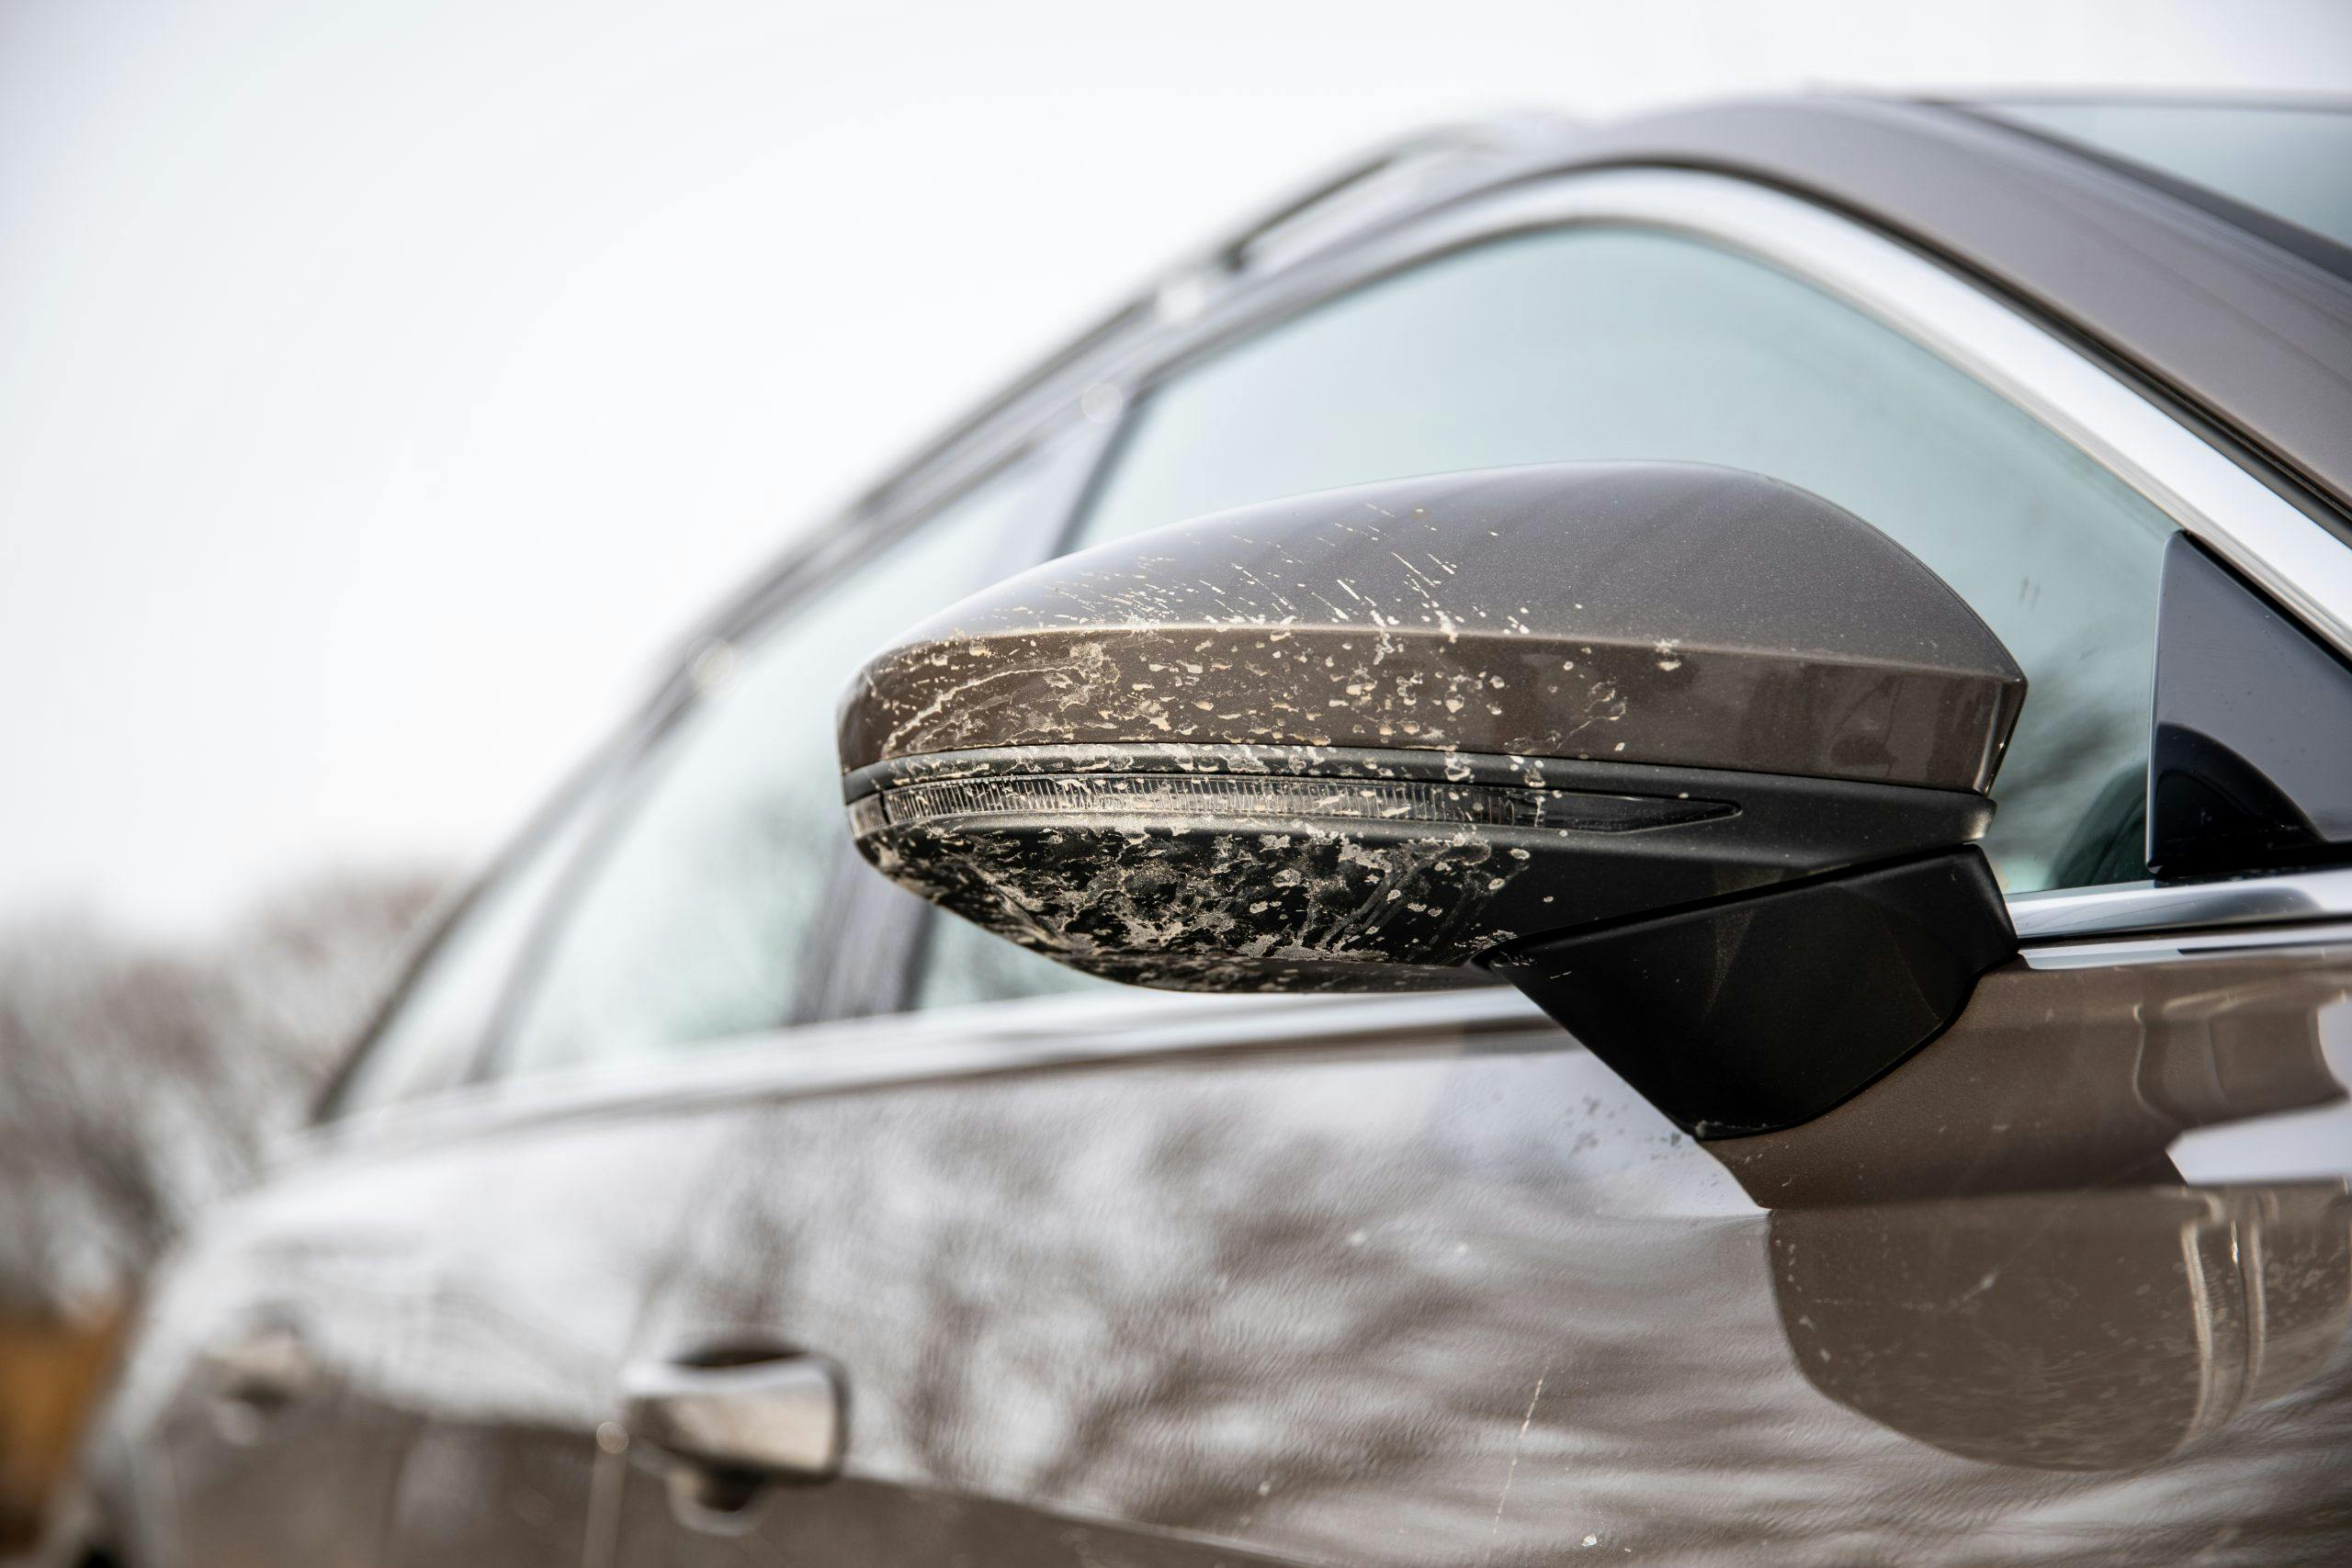 2020 Audi A6 allroad side view mirror